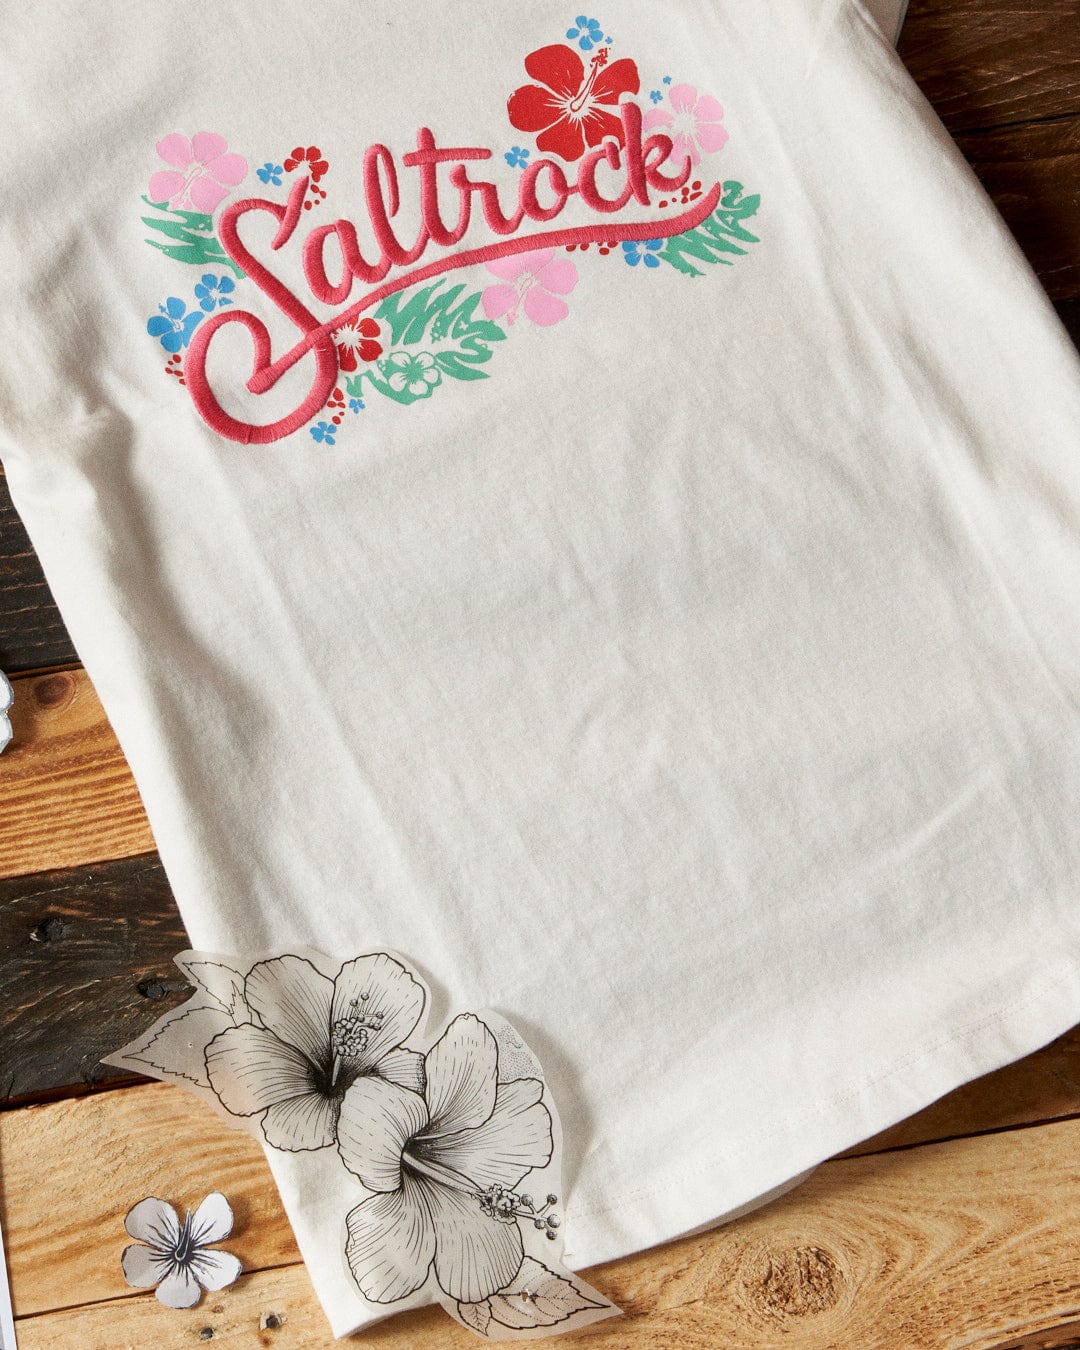 A Tropic - Womens T-shirt - White with the Saltrock branding embroidered on it.